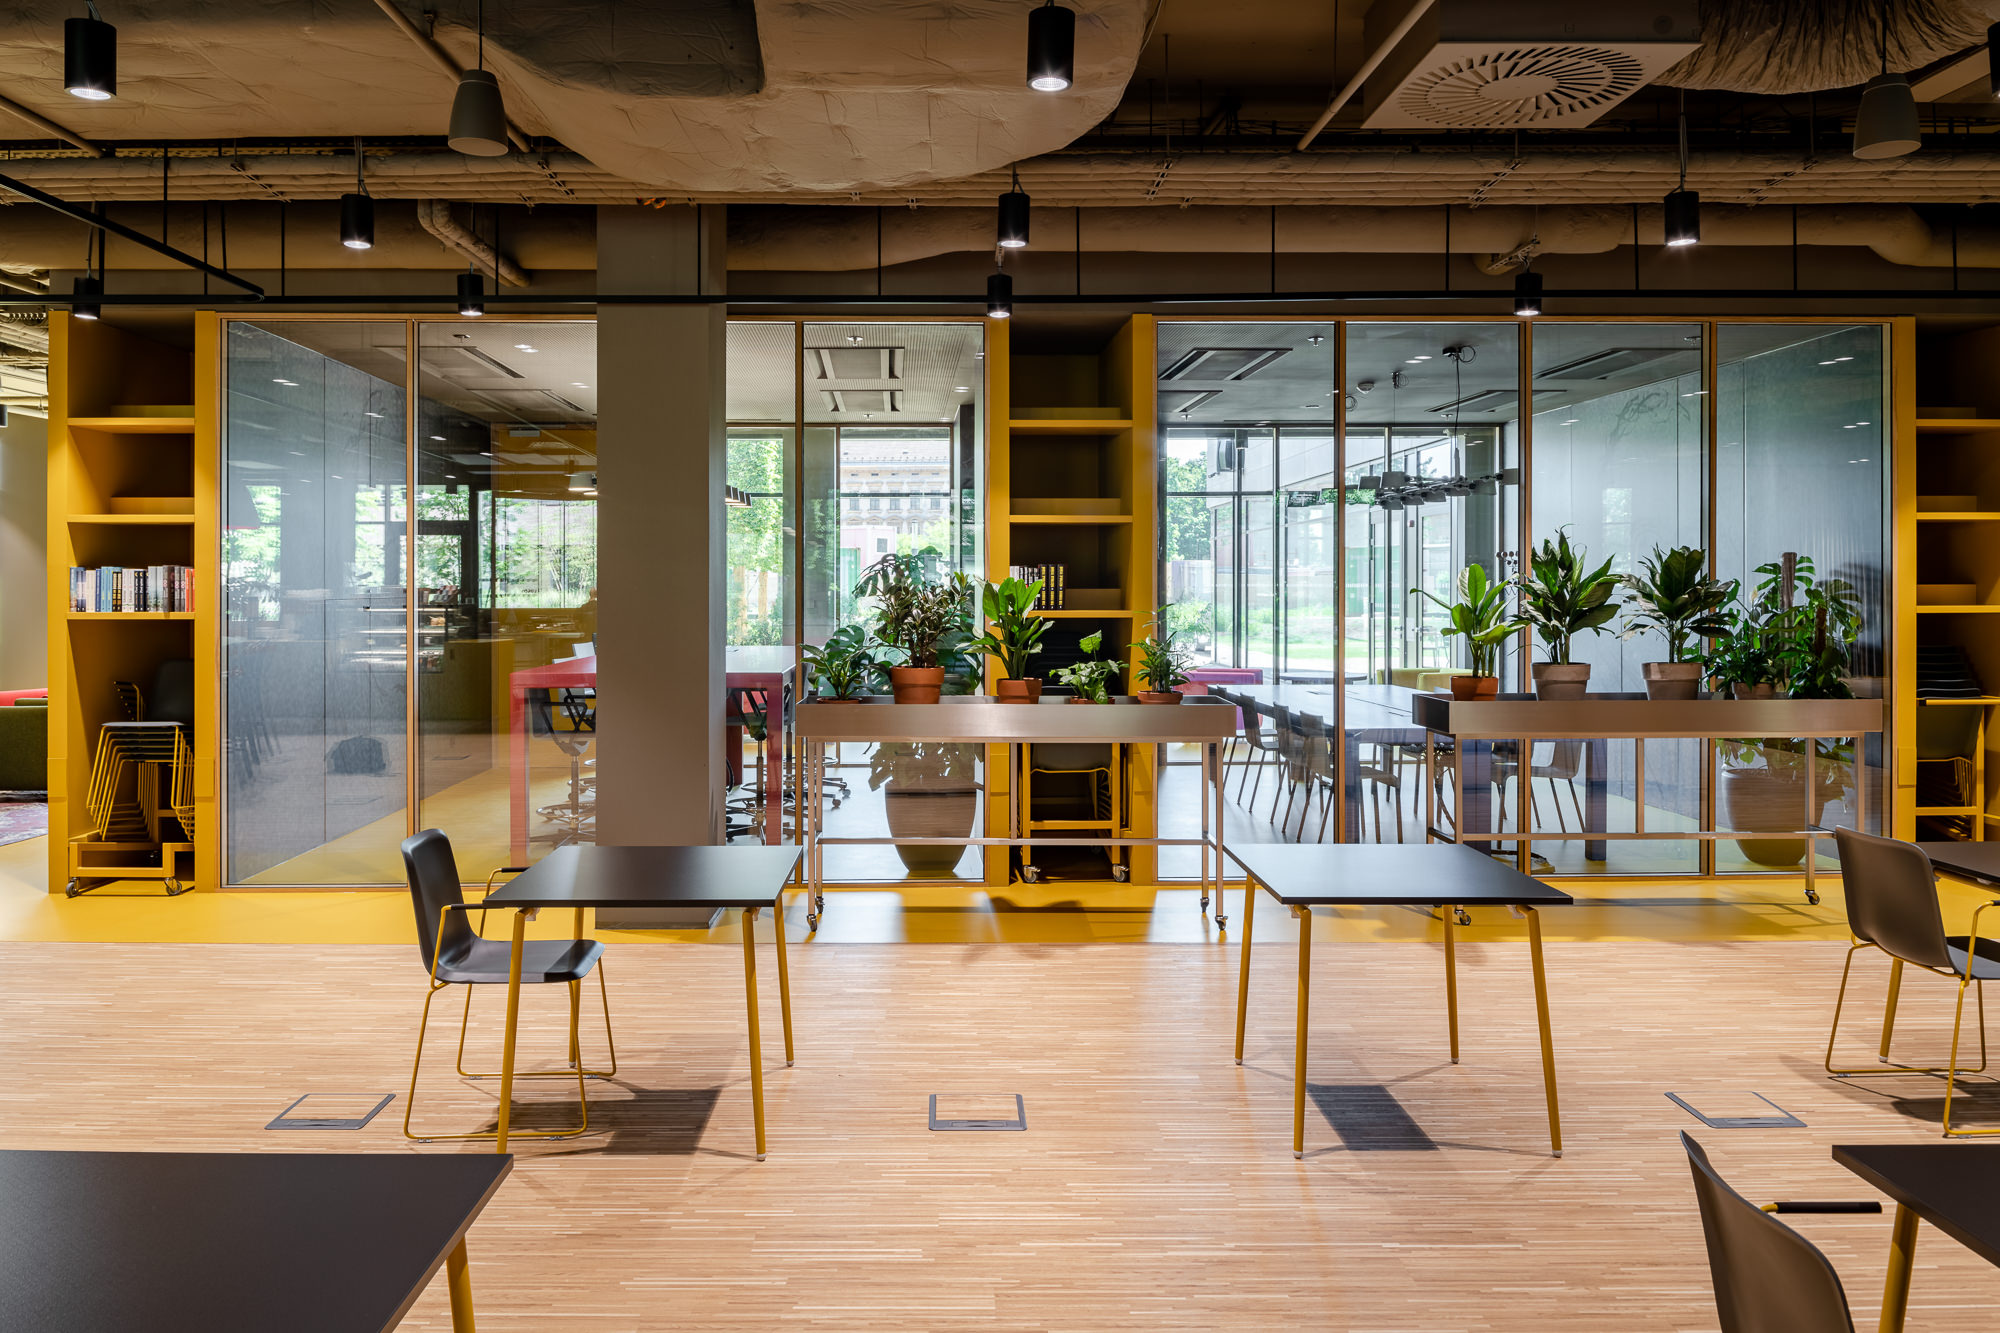  A design gem among coworking spaces 